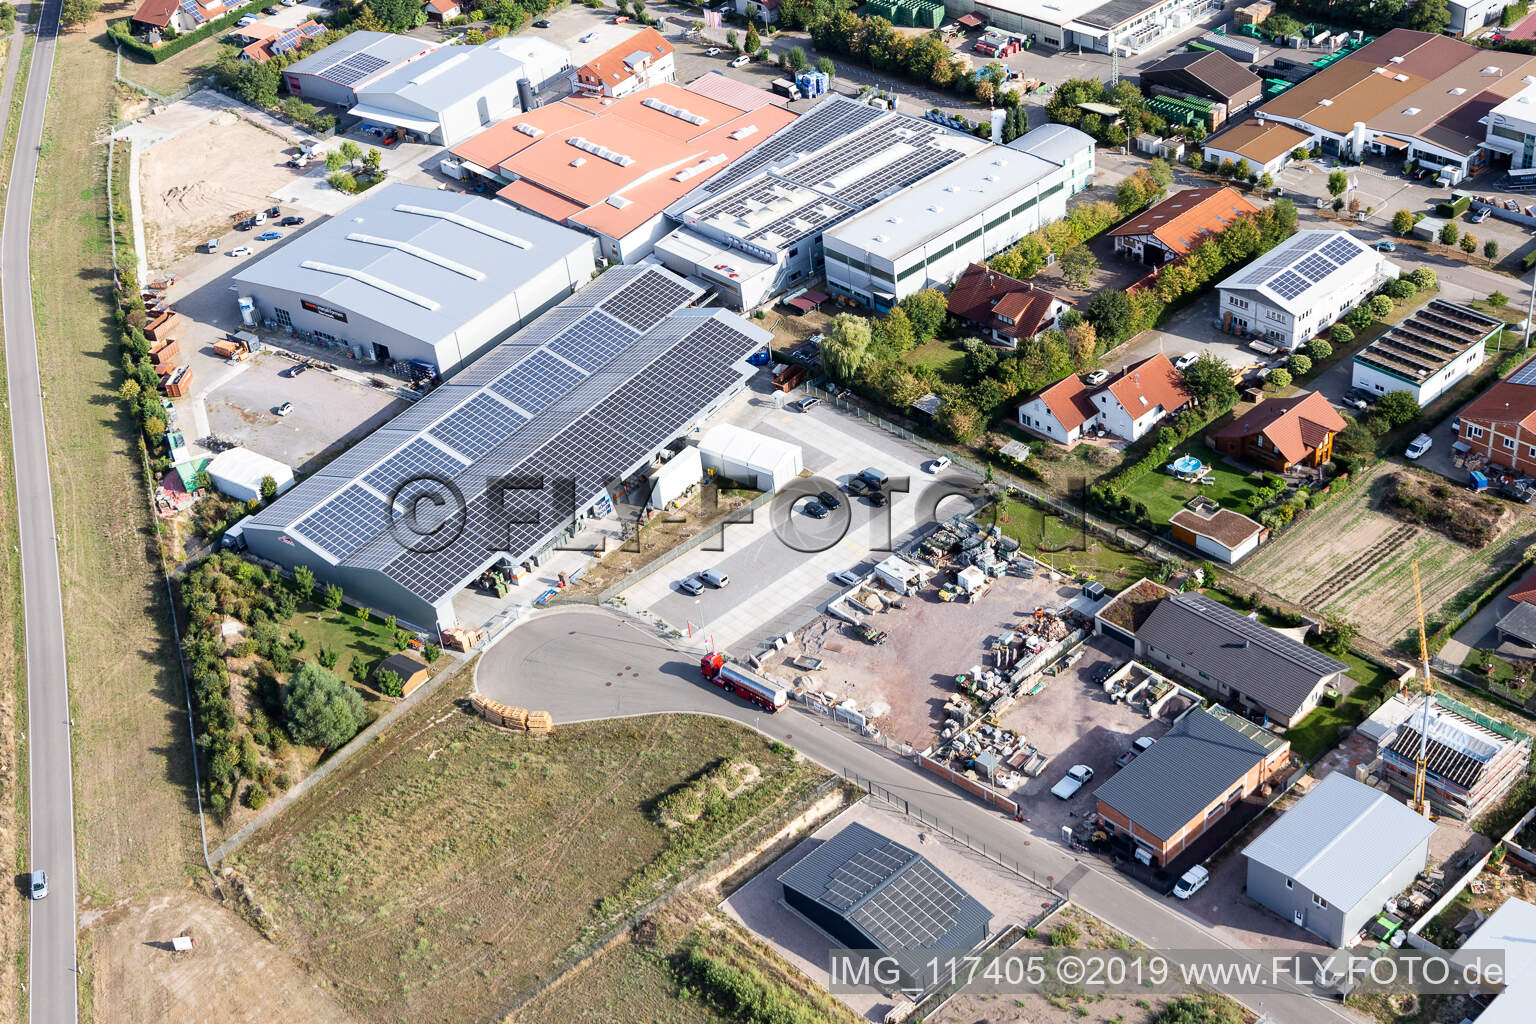 Commercial area Im Gereut, HGGS LaserCUT GmbH & Co. KG in Hatzenbühl in the state Rhineland-Palatinate, Germany viewn from the air